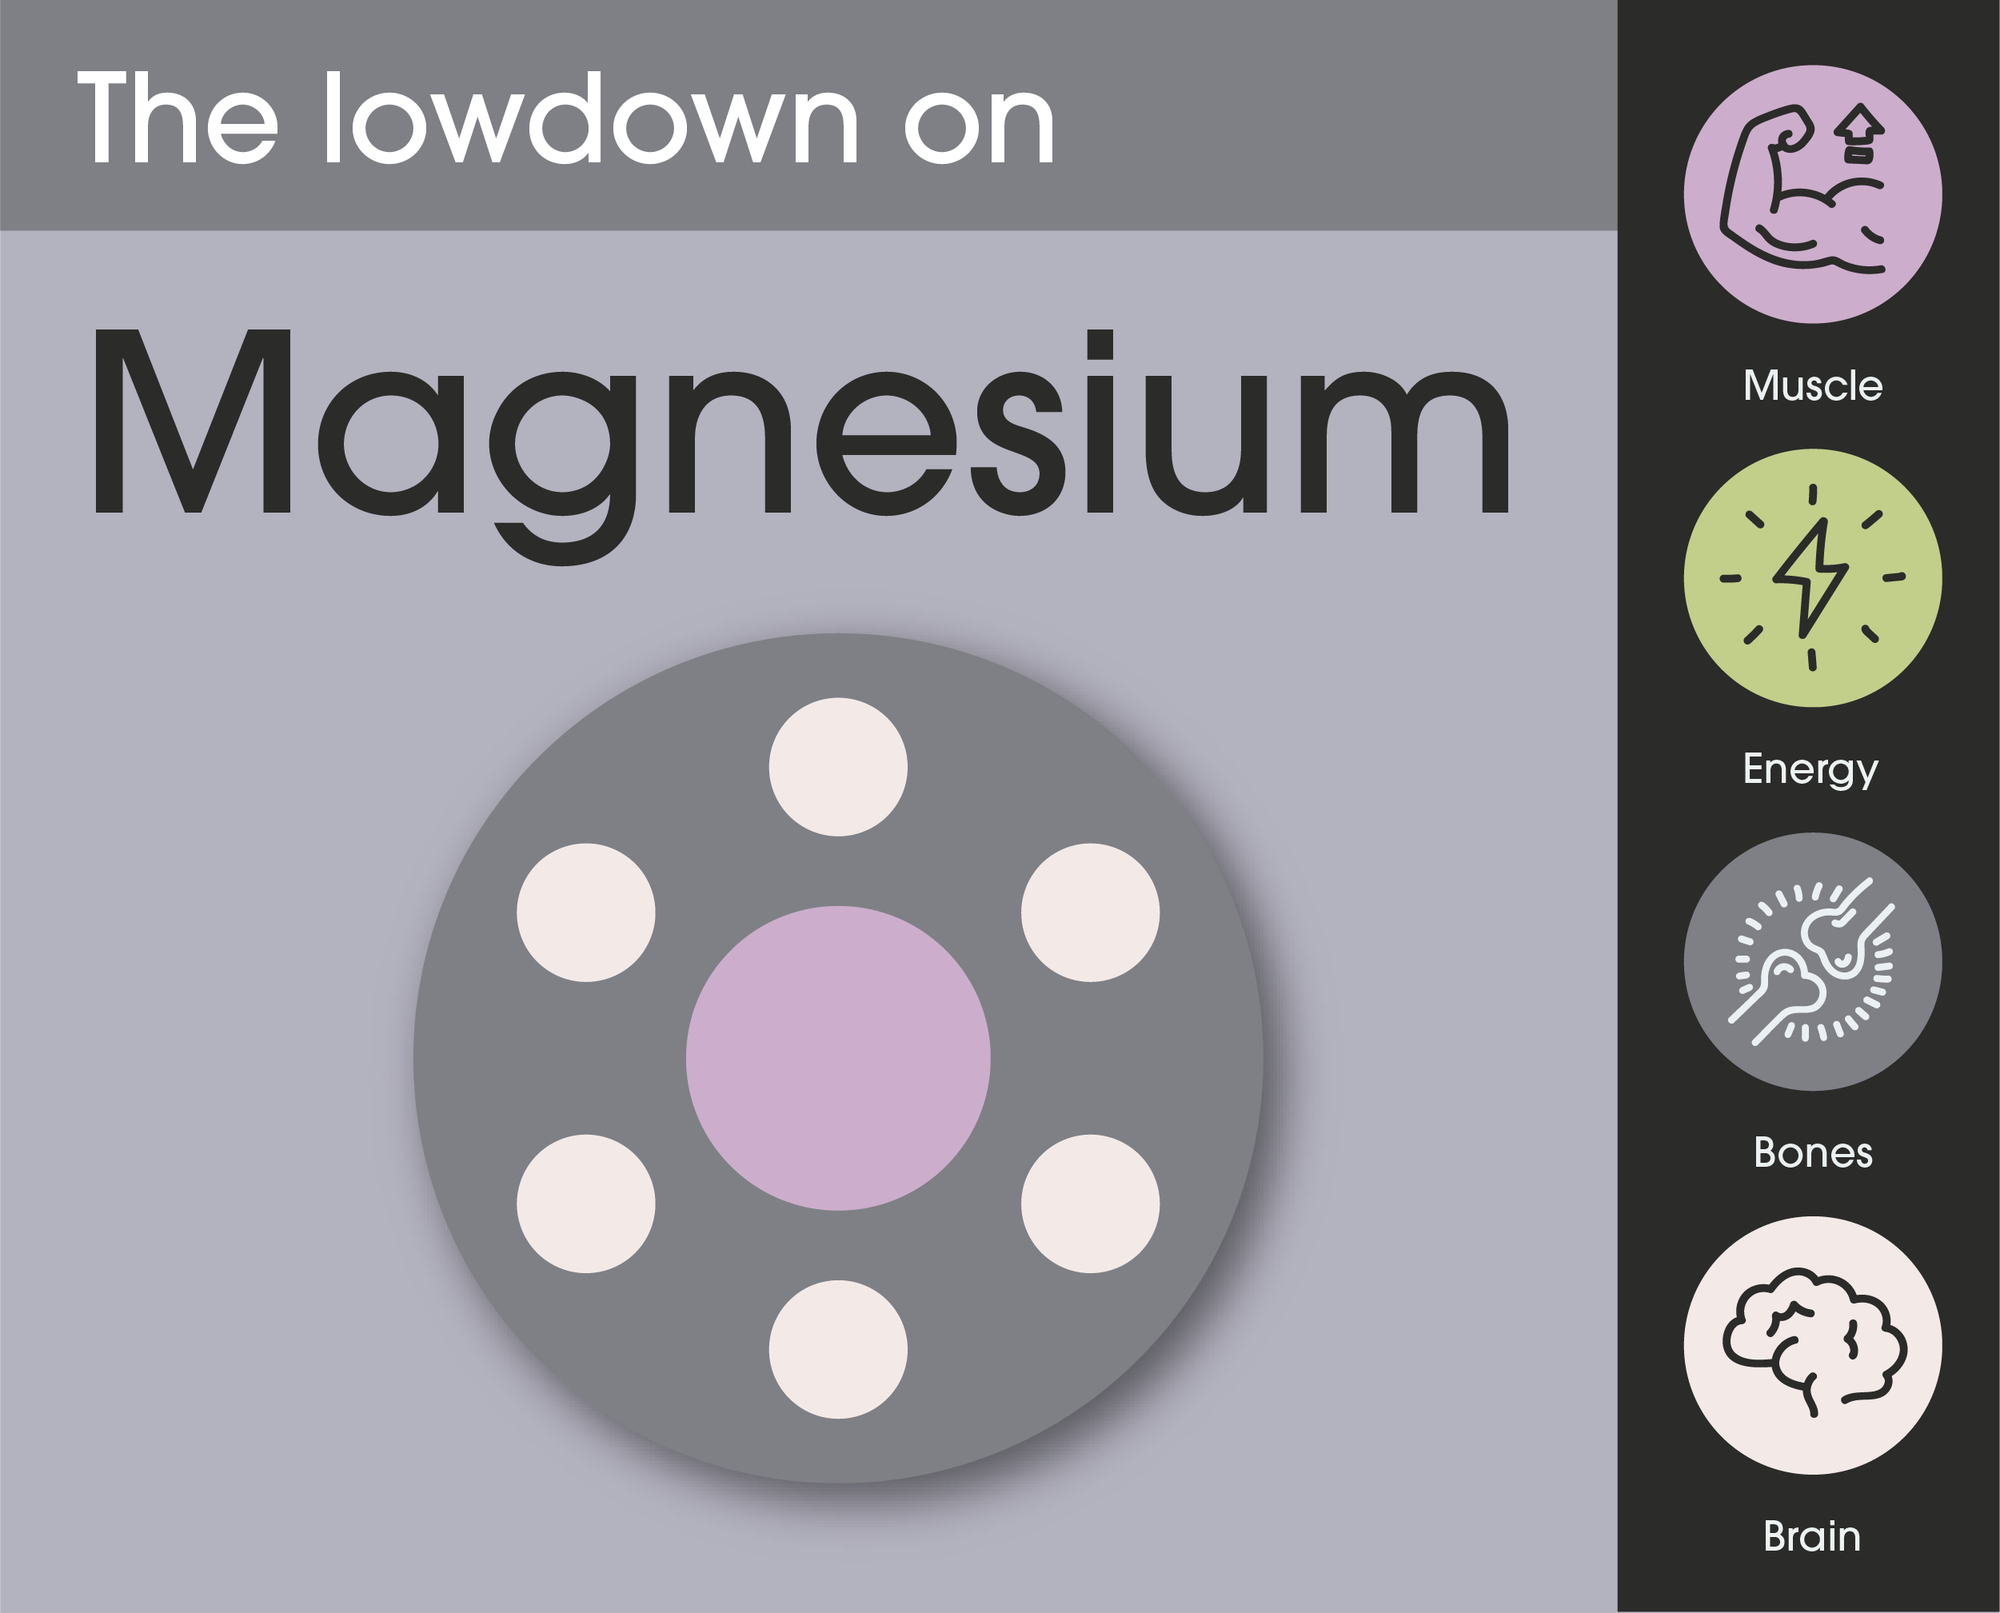 What are the benefits of Magnesium?